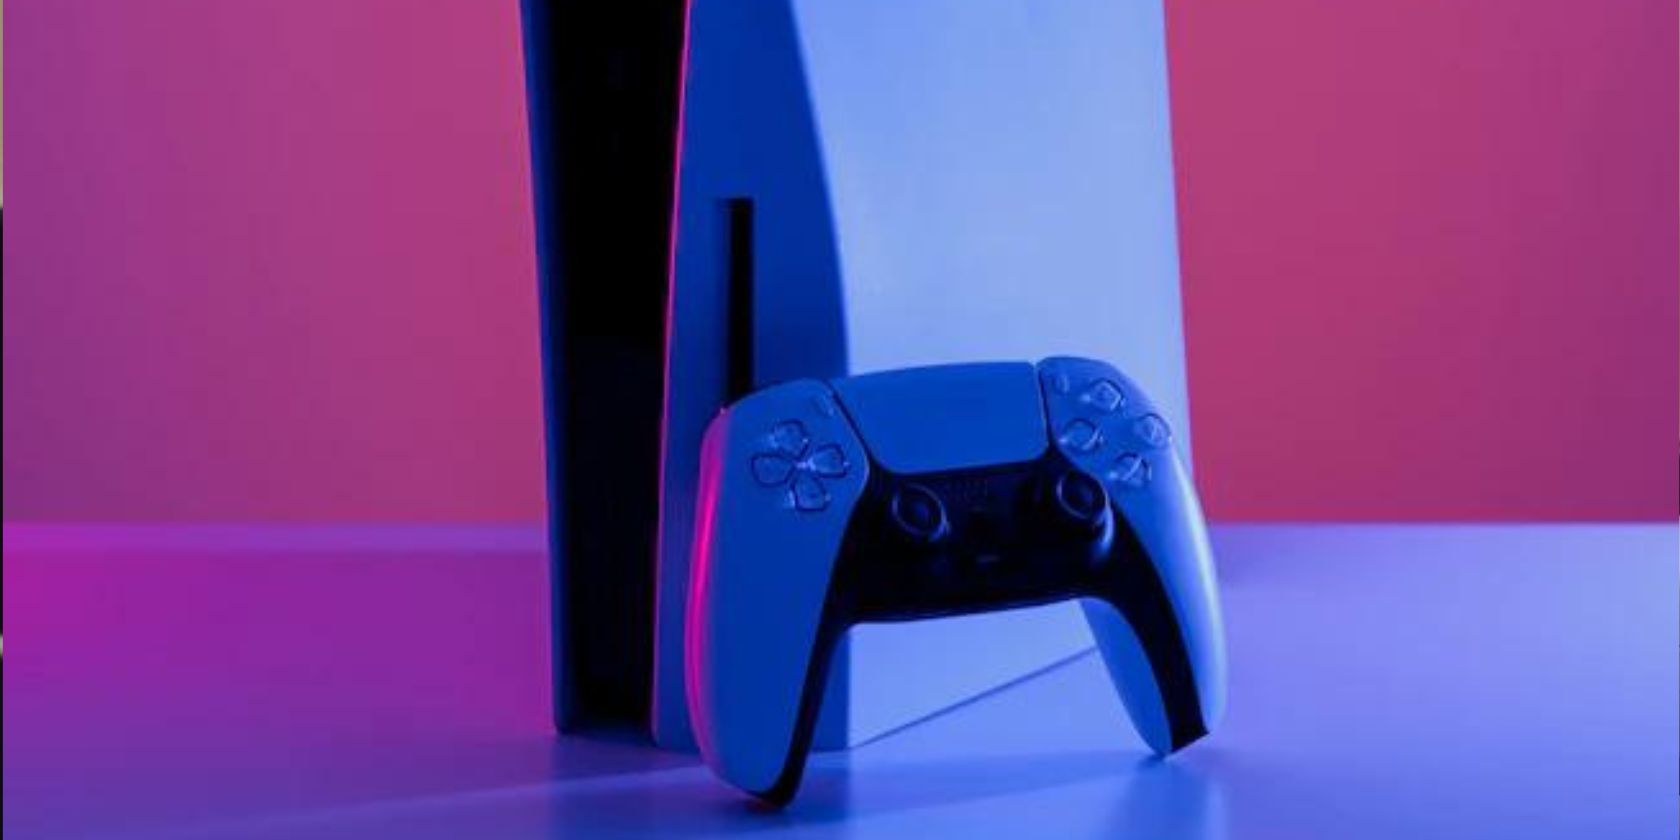 A DualSense controller leaning against PS5 console and pink and purple lighting